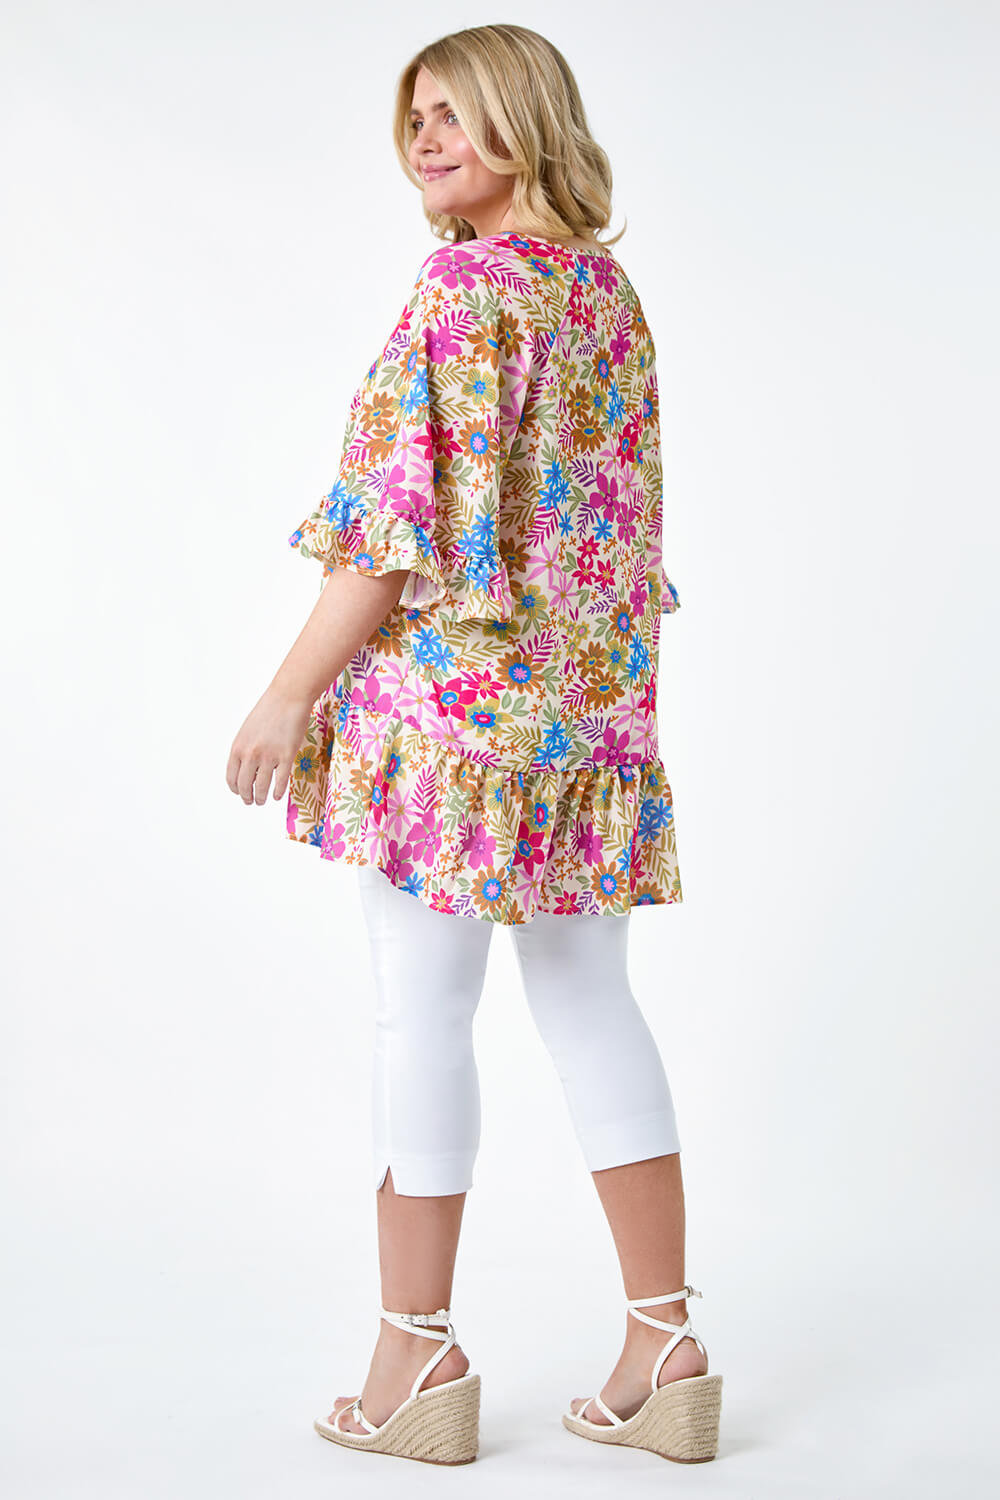 PINK Curve Floral Print Frill Detail Top, Image 3 of 5